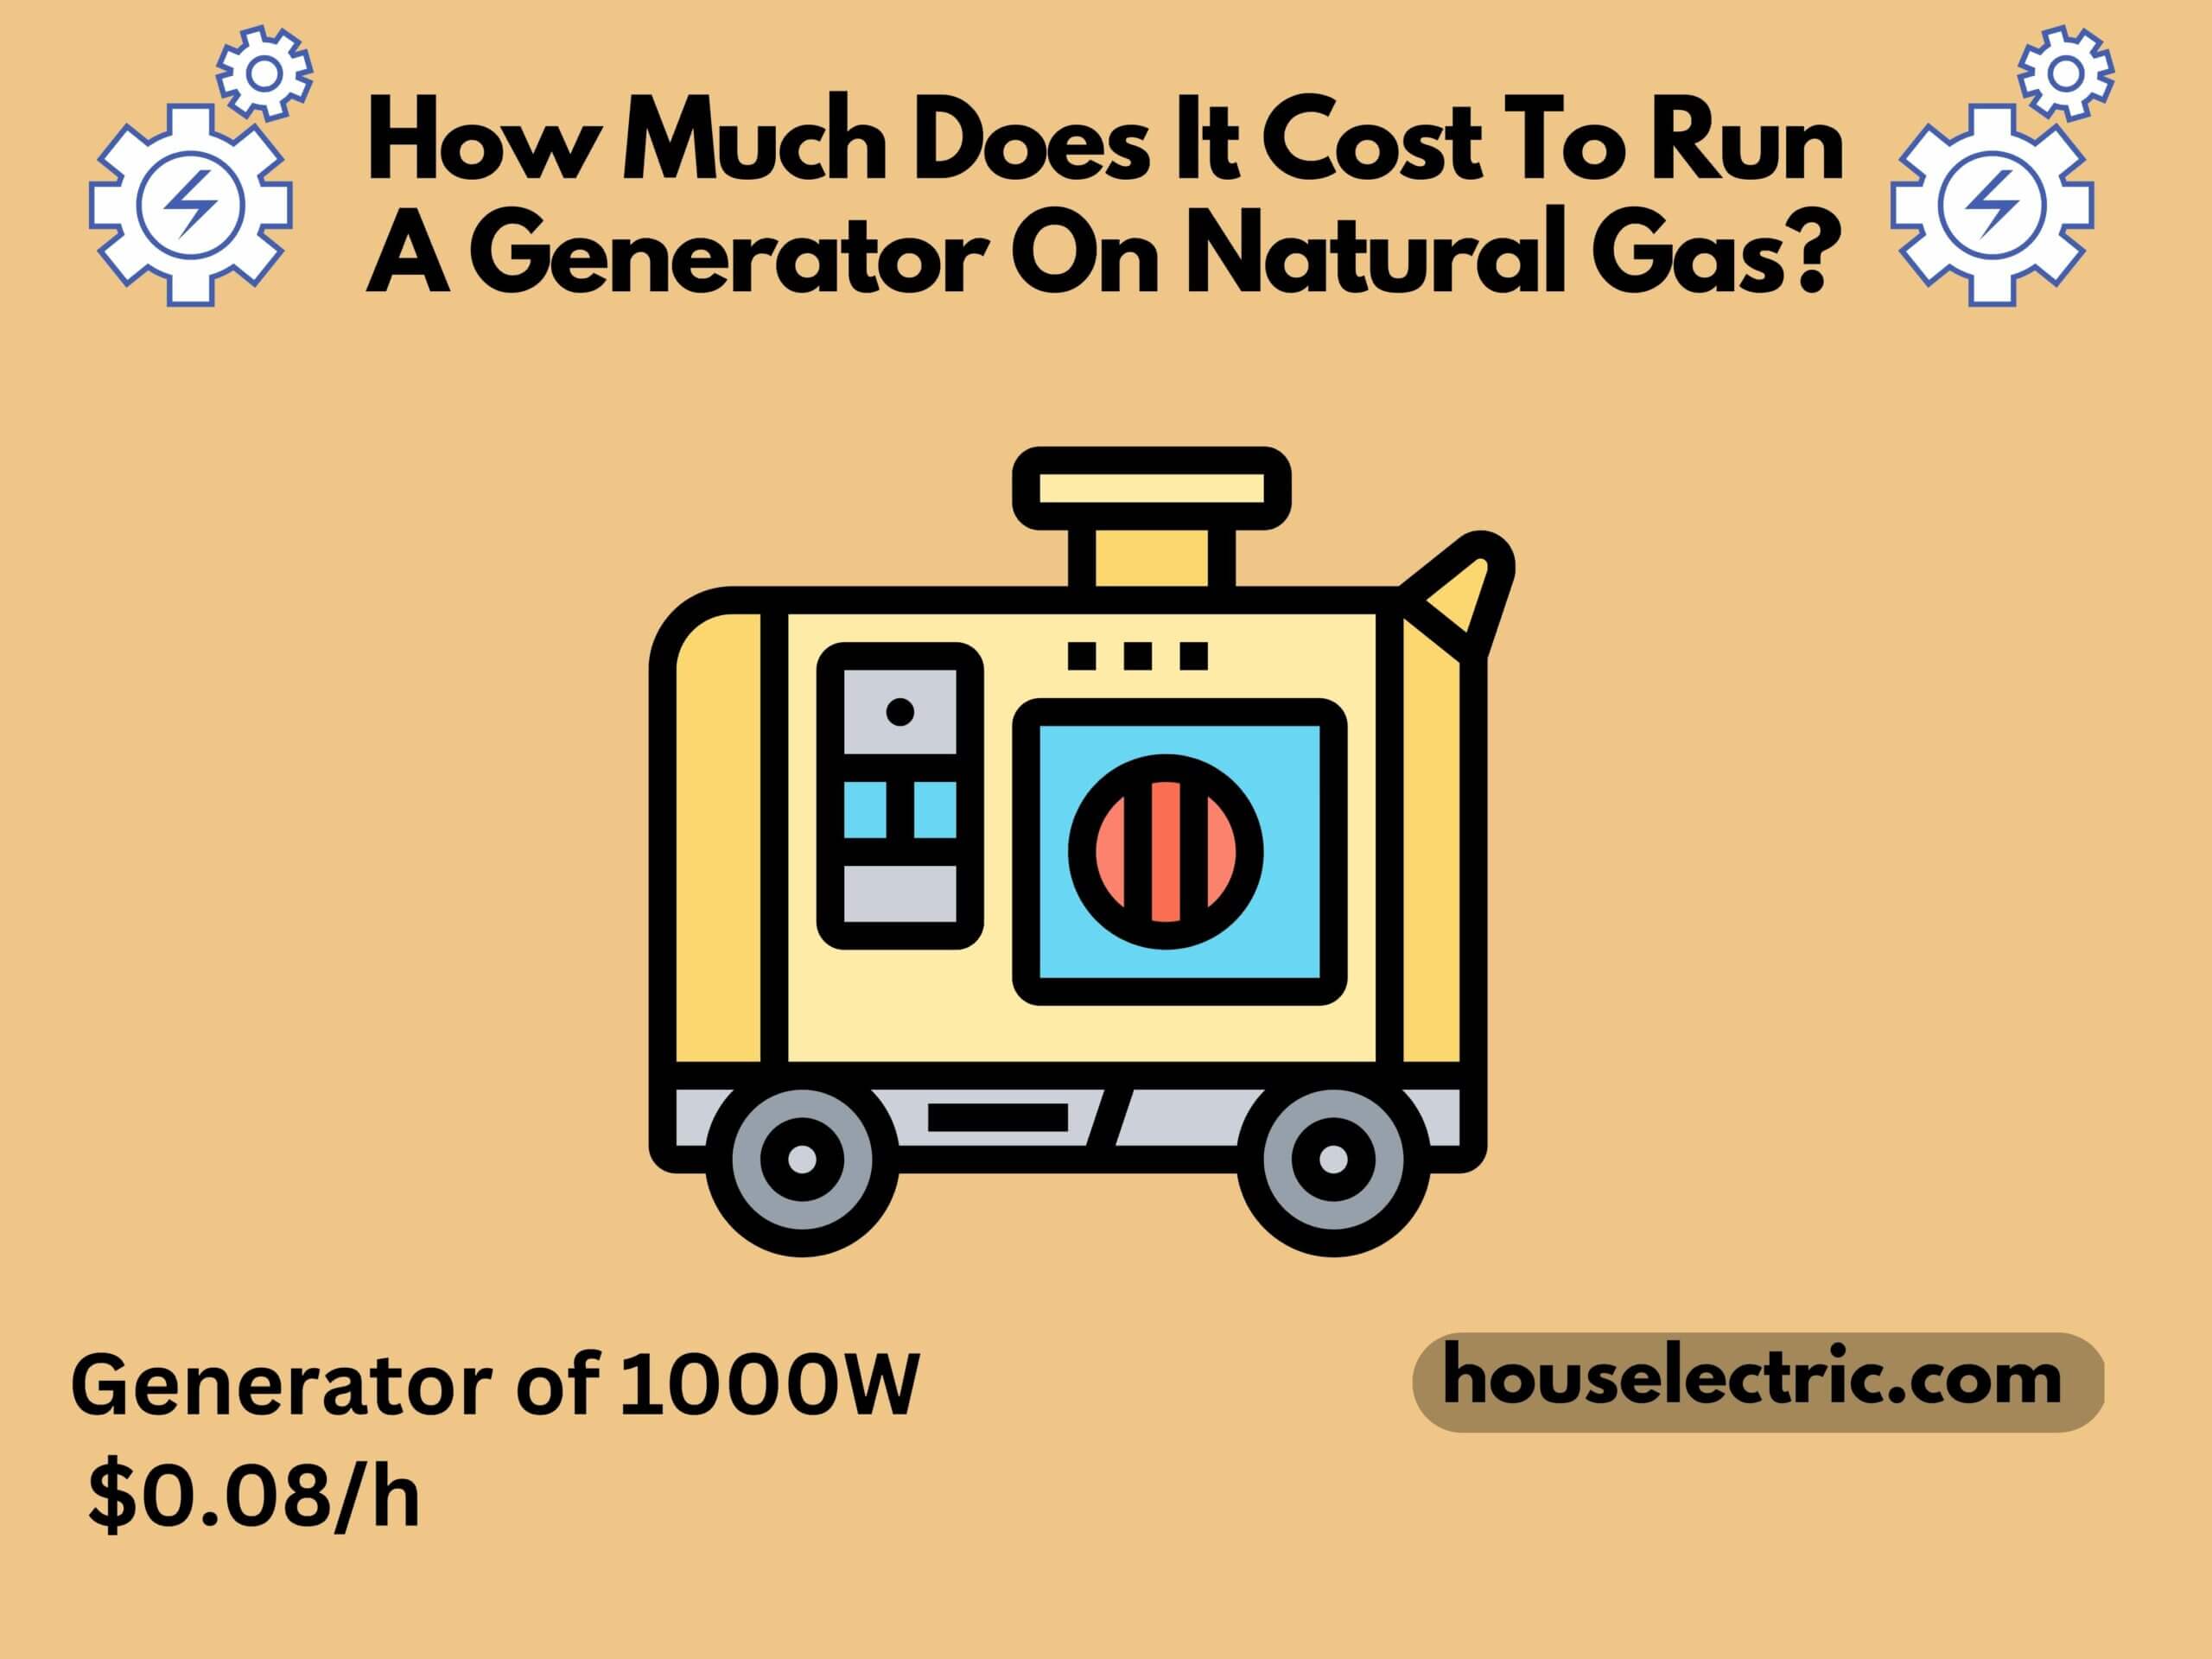 Cost to run a generator on natural gas